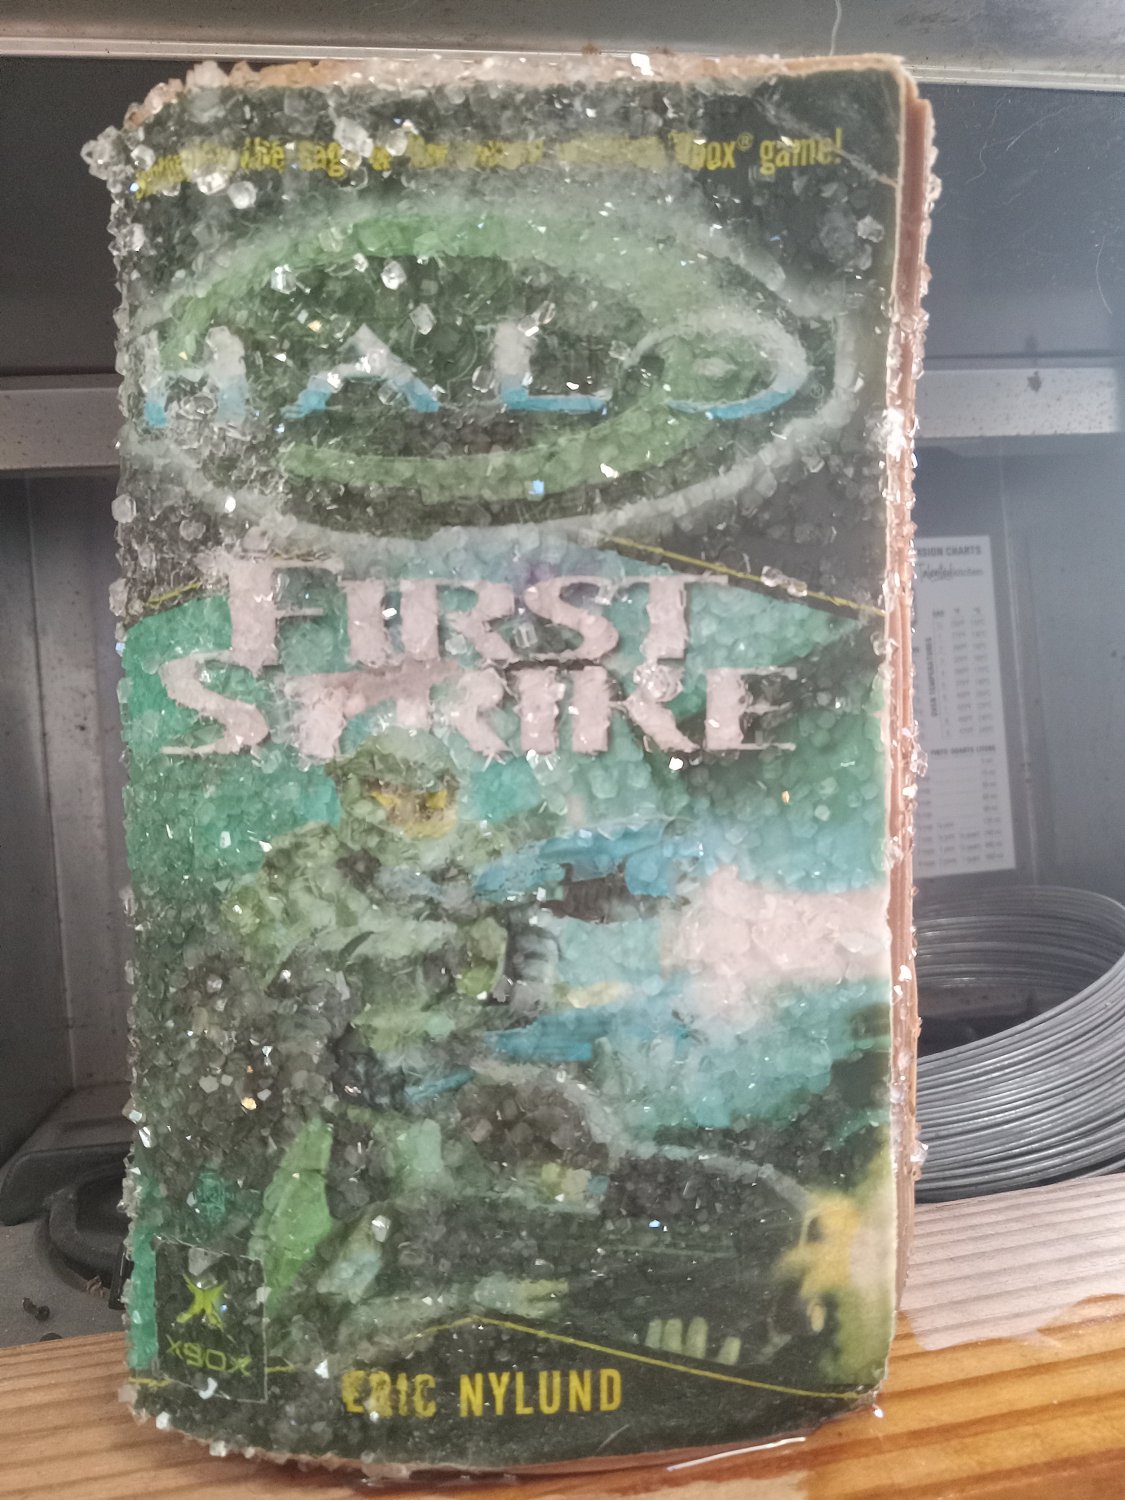 Crystallized Book "Halo First Strike" written by Eric Nylund